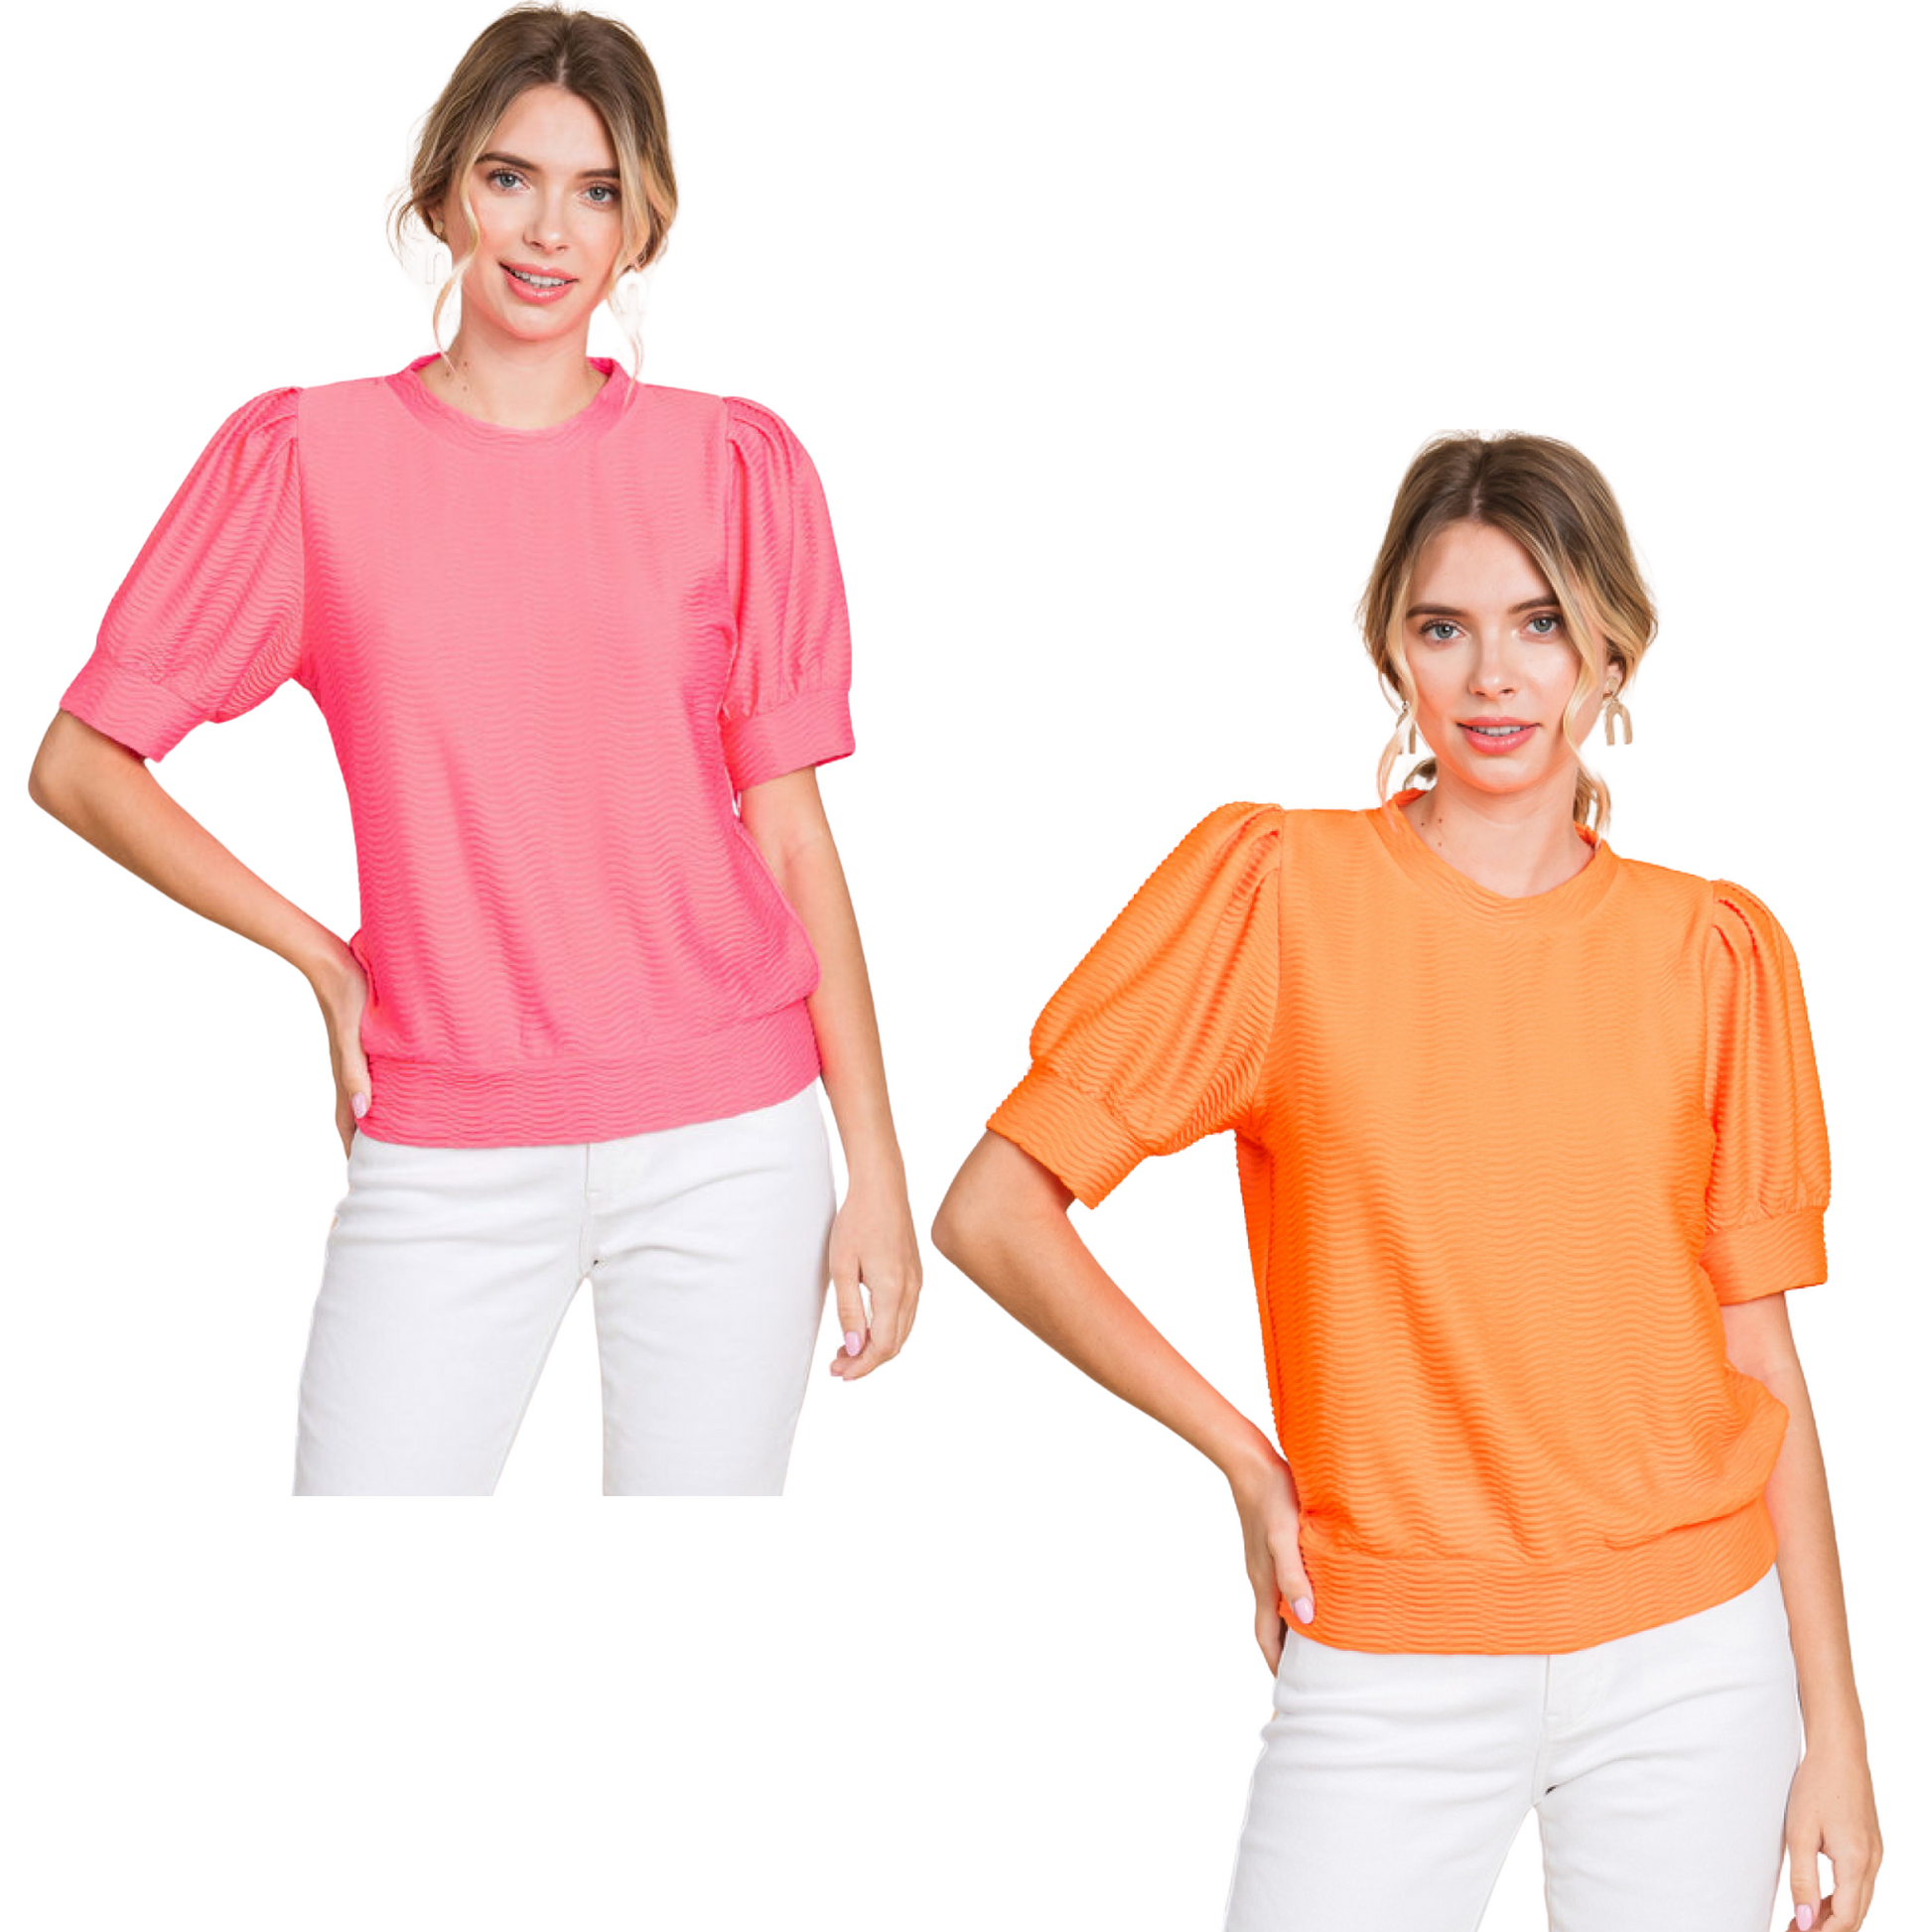 This Textured Short Sleeve Top features a trendy U-neck design, short puffed sleeves, and stylish band hems. Made of lightweight, non-sheer material, this top is perfect for any occasion. Choose from vibrant neon orange or neon pink to add a pop of color to your wardrobe.